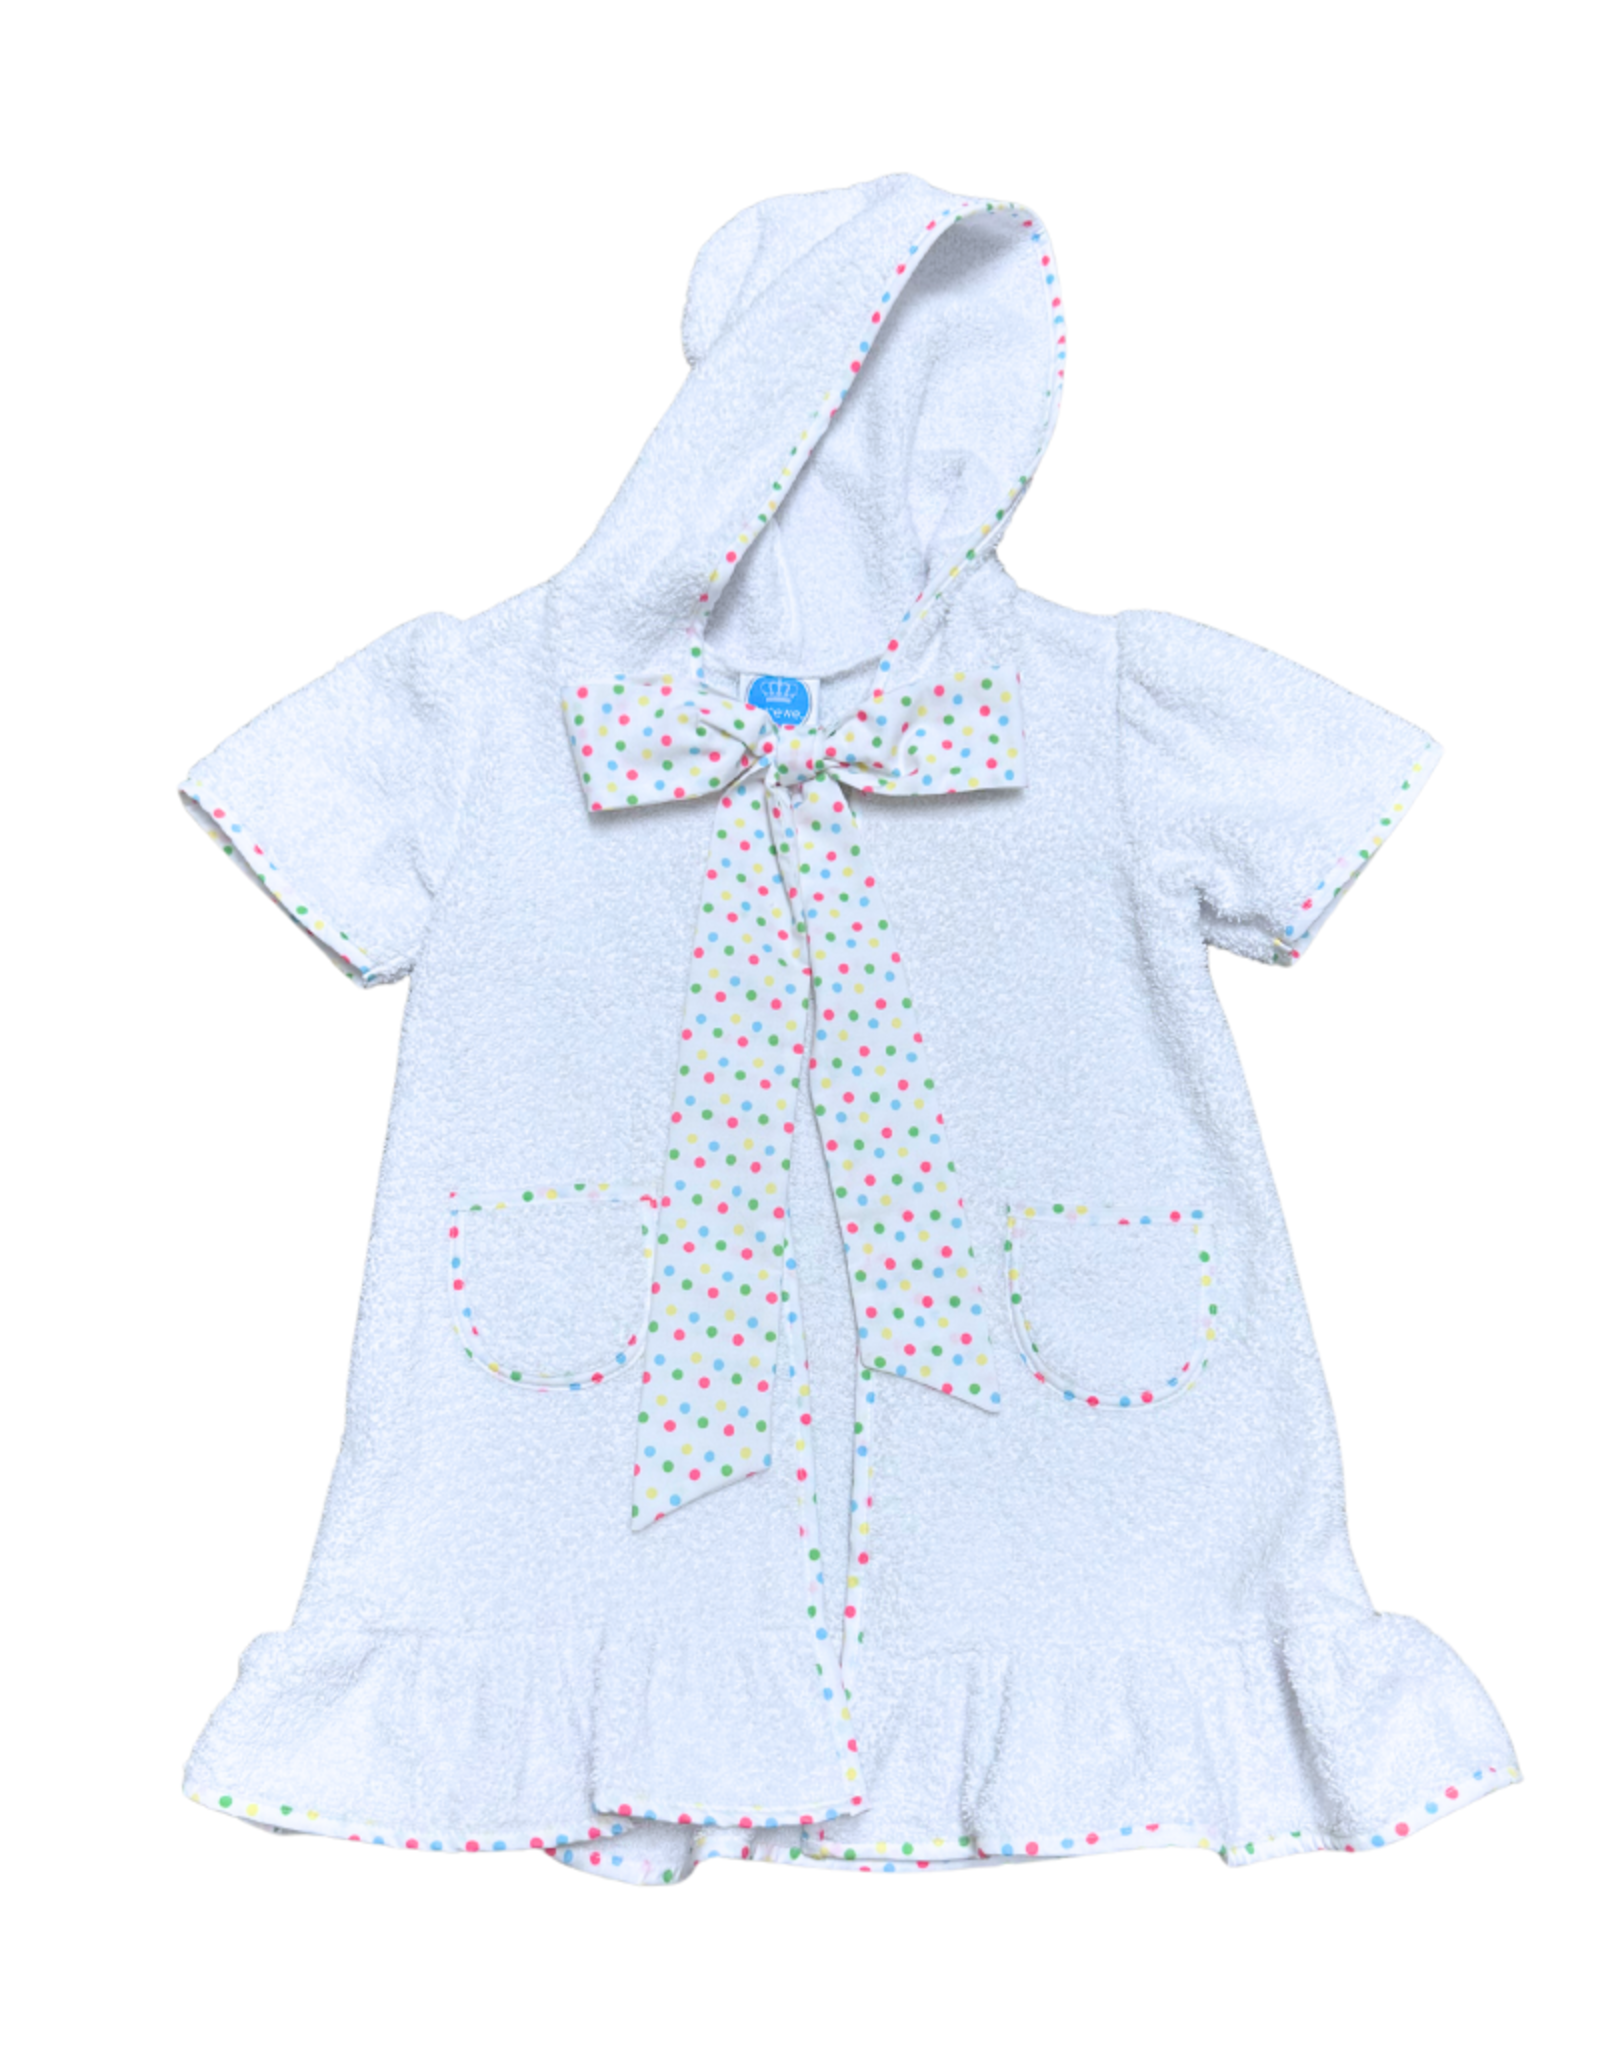 Krewe Kids Hooded Terry Cloth Cover Up with Polka Dot Bow